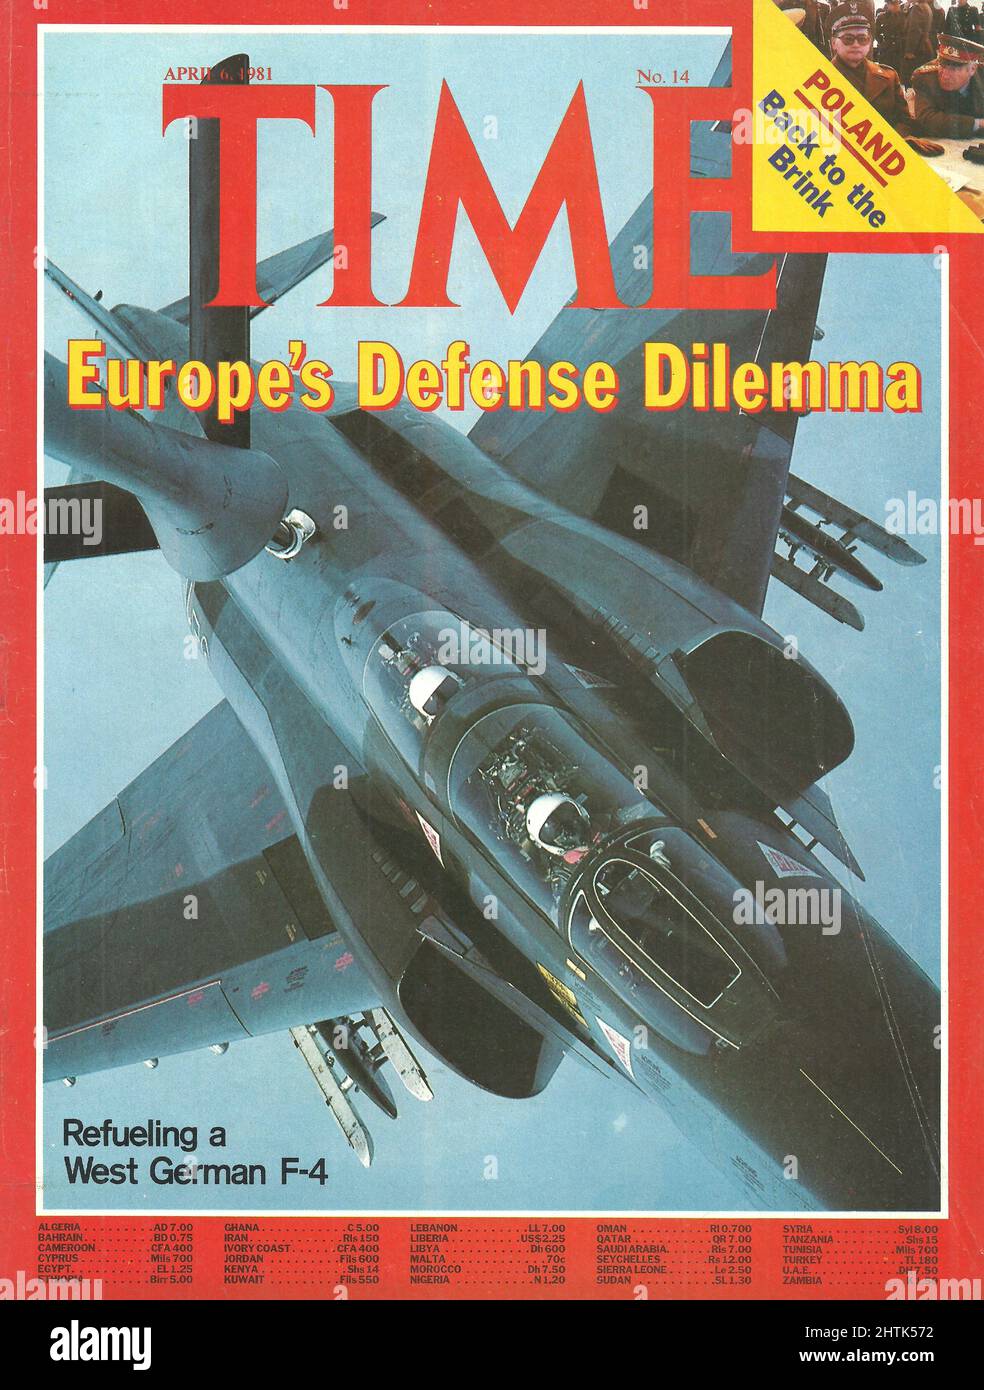 Time magazine cover April 6 1981 Poland Back to the brink Europe's Defense Dilemma Refueling a West German F-4 Stock Photo